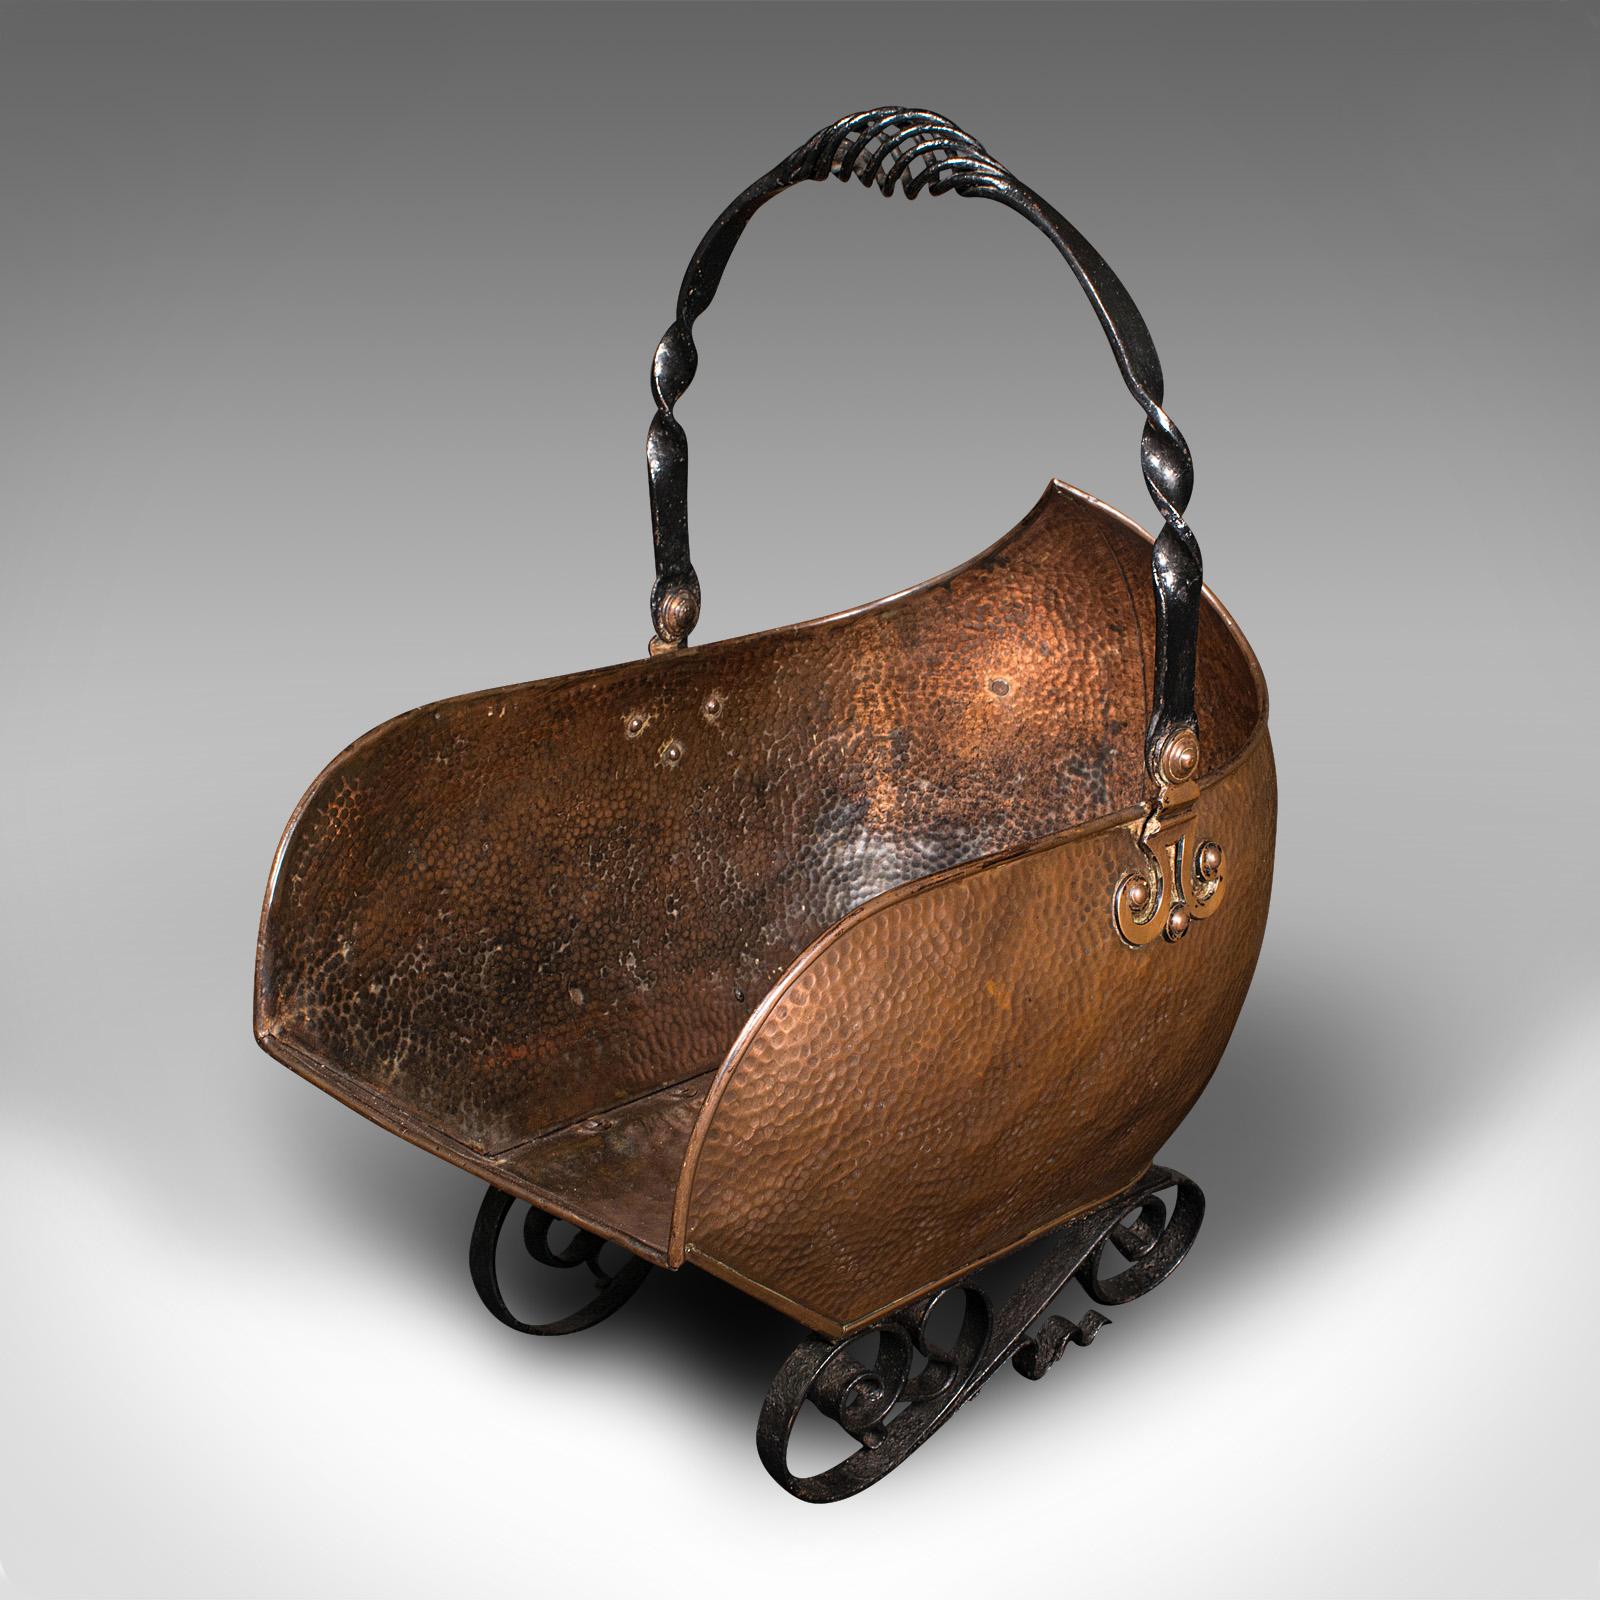 This is an antique Art Nouveau coal scuttle. An English, copper and wrought iron fireside log bucket in the shape of a pram, dating to the late Victorian period, circa 1900.

Fascinating form and wonderful hand-beaten appeal
Displays a desirable